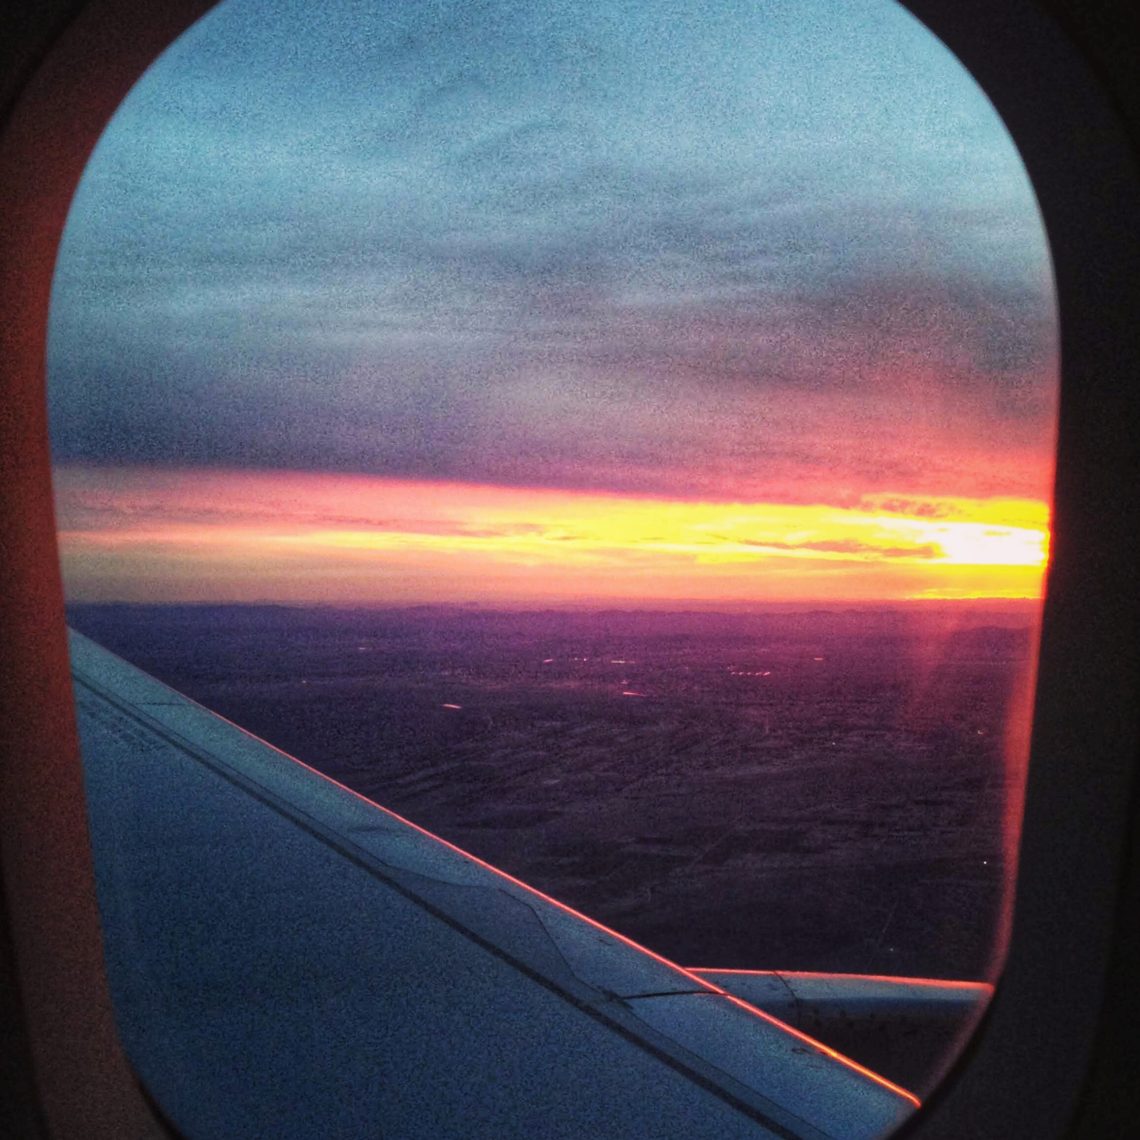 Sunset out the airplane window